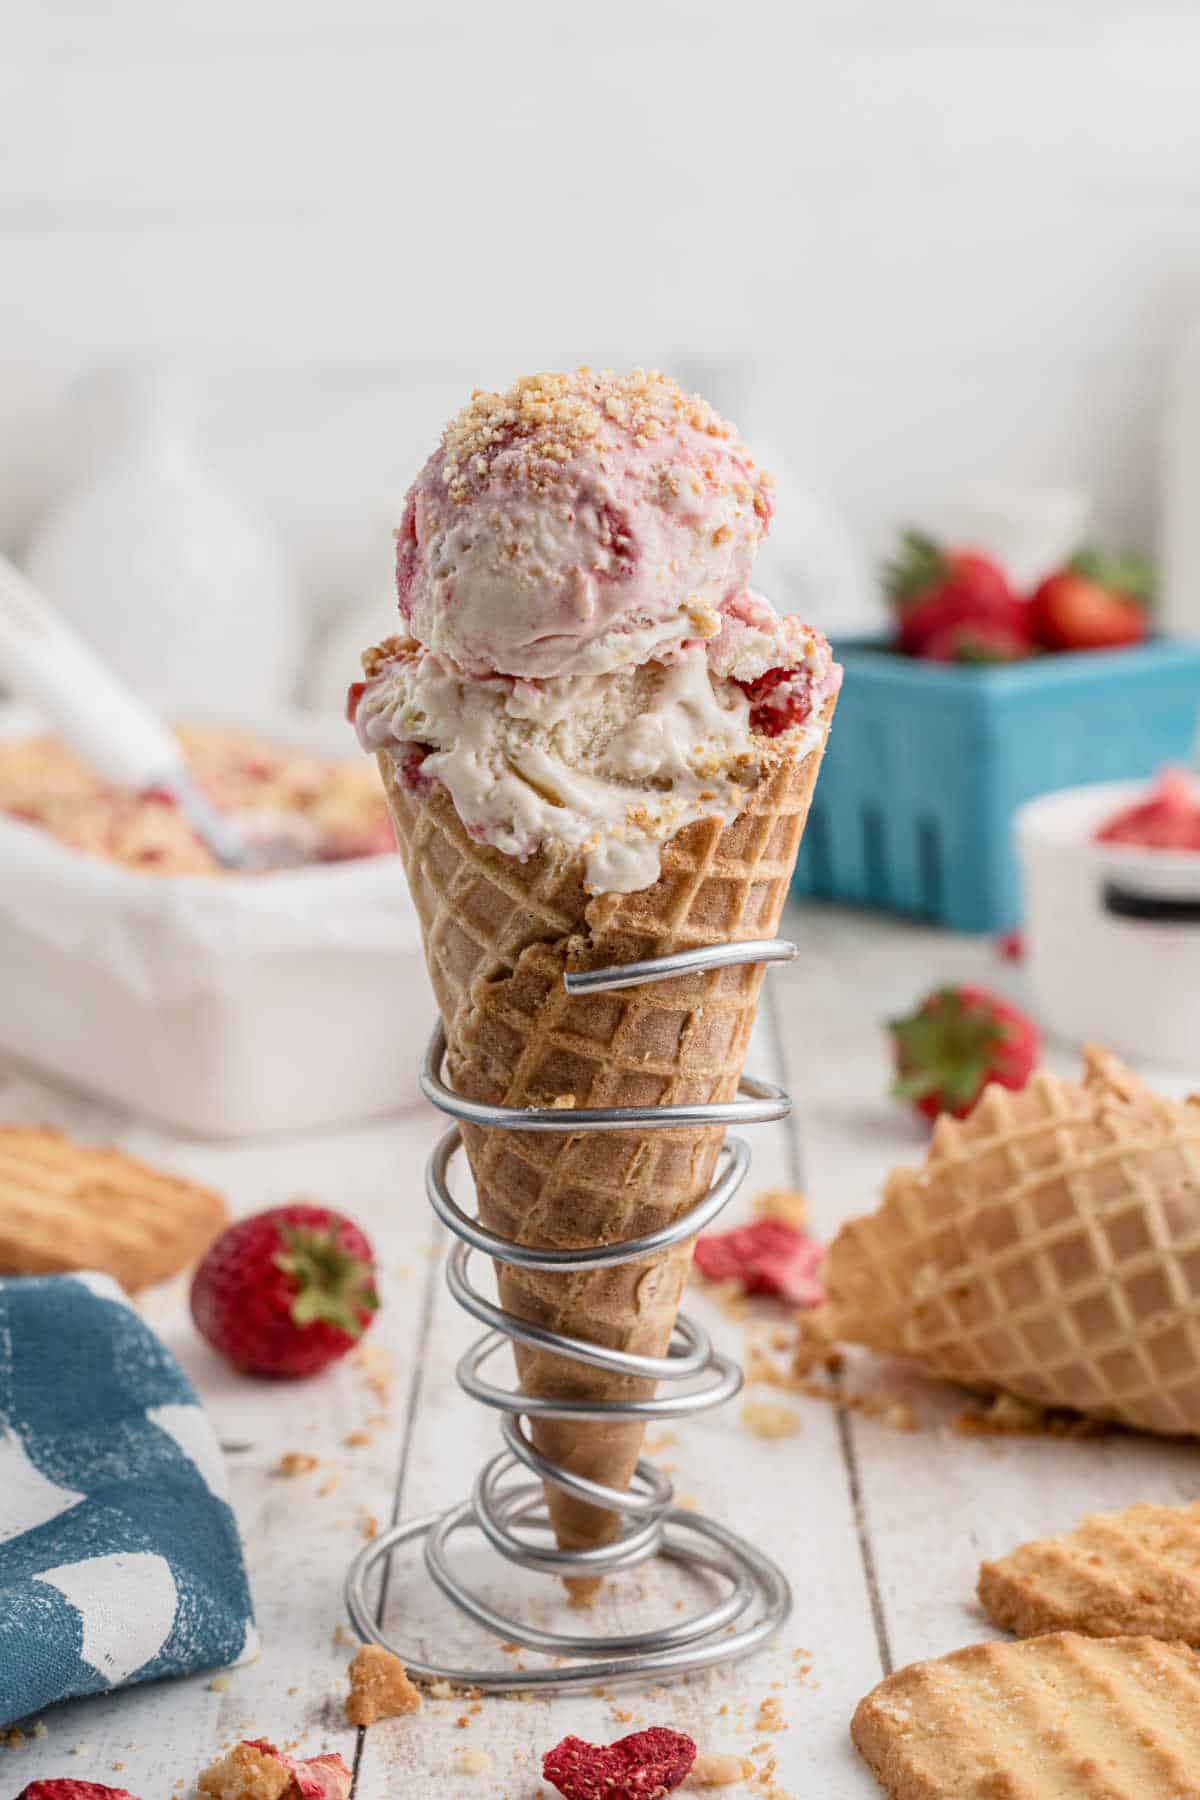 Strawberry Shortcake Ice Cream in a waffle cone, standing up in a wire holder.